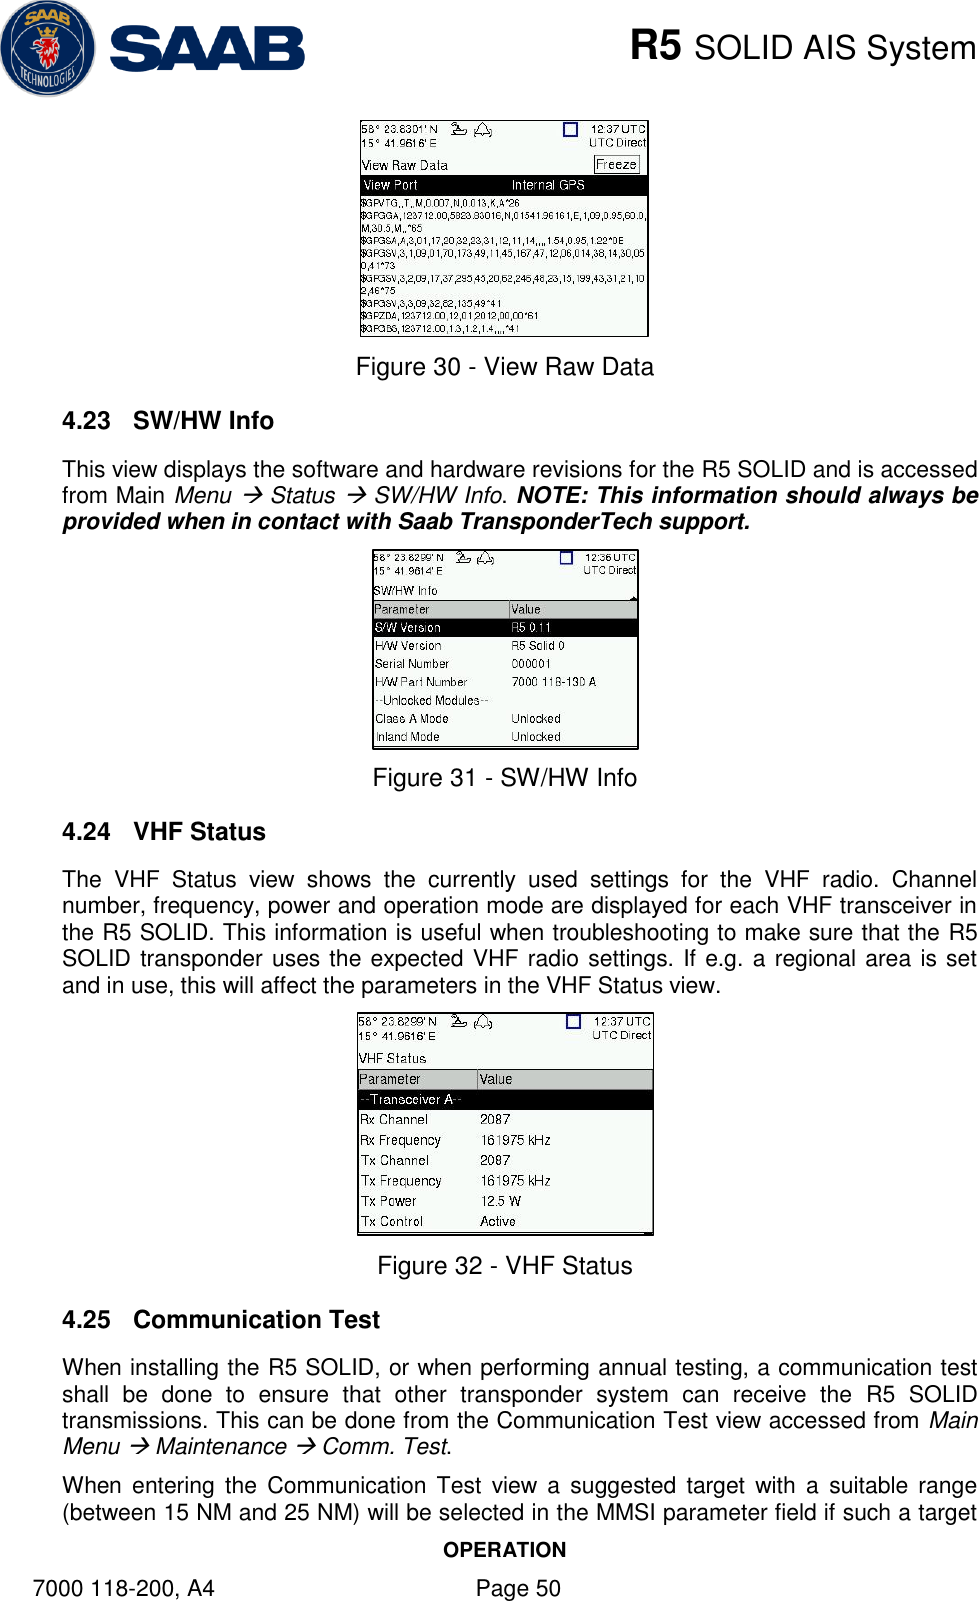    R5 SOLID AIS System OPERATION 7000 118-200, A4    Page 50  Figure 30 - View Raw Data 4.23  SW/HW Info This view displays the software and hardware revisions for the R5 SOLID and is accessed from Main Menu  Status  SW/HW Info. NOTE: This information should always be provided when in contact with Saab TransponderTech support.   Figure 31 - SW/HW Info 4.24  VHF Status The  VHF  Status  view  shows  the  currently  used  settings  for  the  VHF  radio.  Channel number, frequency, power and operation mode are displayed for each VHF transceiver in the R5 SOLID. This information is useful when troubleshooting to make sure that the R5 SOLID transponder uses the expected VHF radio settings. If e.g. a regional area is set and in use, this will affect the parameters in the VHF Status view.   Figure 32 - VHF Status 4.25  Communication Test When installing the R5 SOLID, or when performing annual testing, a communication test shall  be  done  to  ensure  that  other  transponder  system  can  receive  the  R5  SOLID transmissions. This can be done from the Communication Test view accessed from Main Menu  Maintenance  Comm. Test.  When  entering the  Communication Test  view  a  suggested  target  with  a  suitable  range (between 15 NM and 25 NM) will be selected in the MMSI parameter field if such a target 